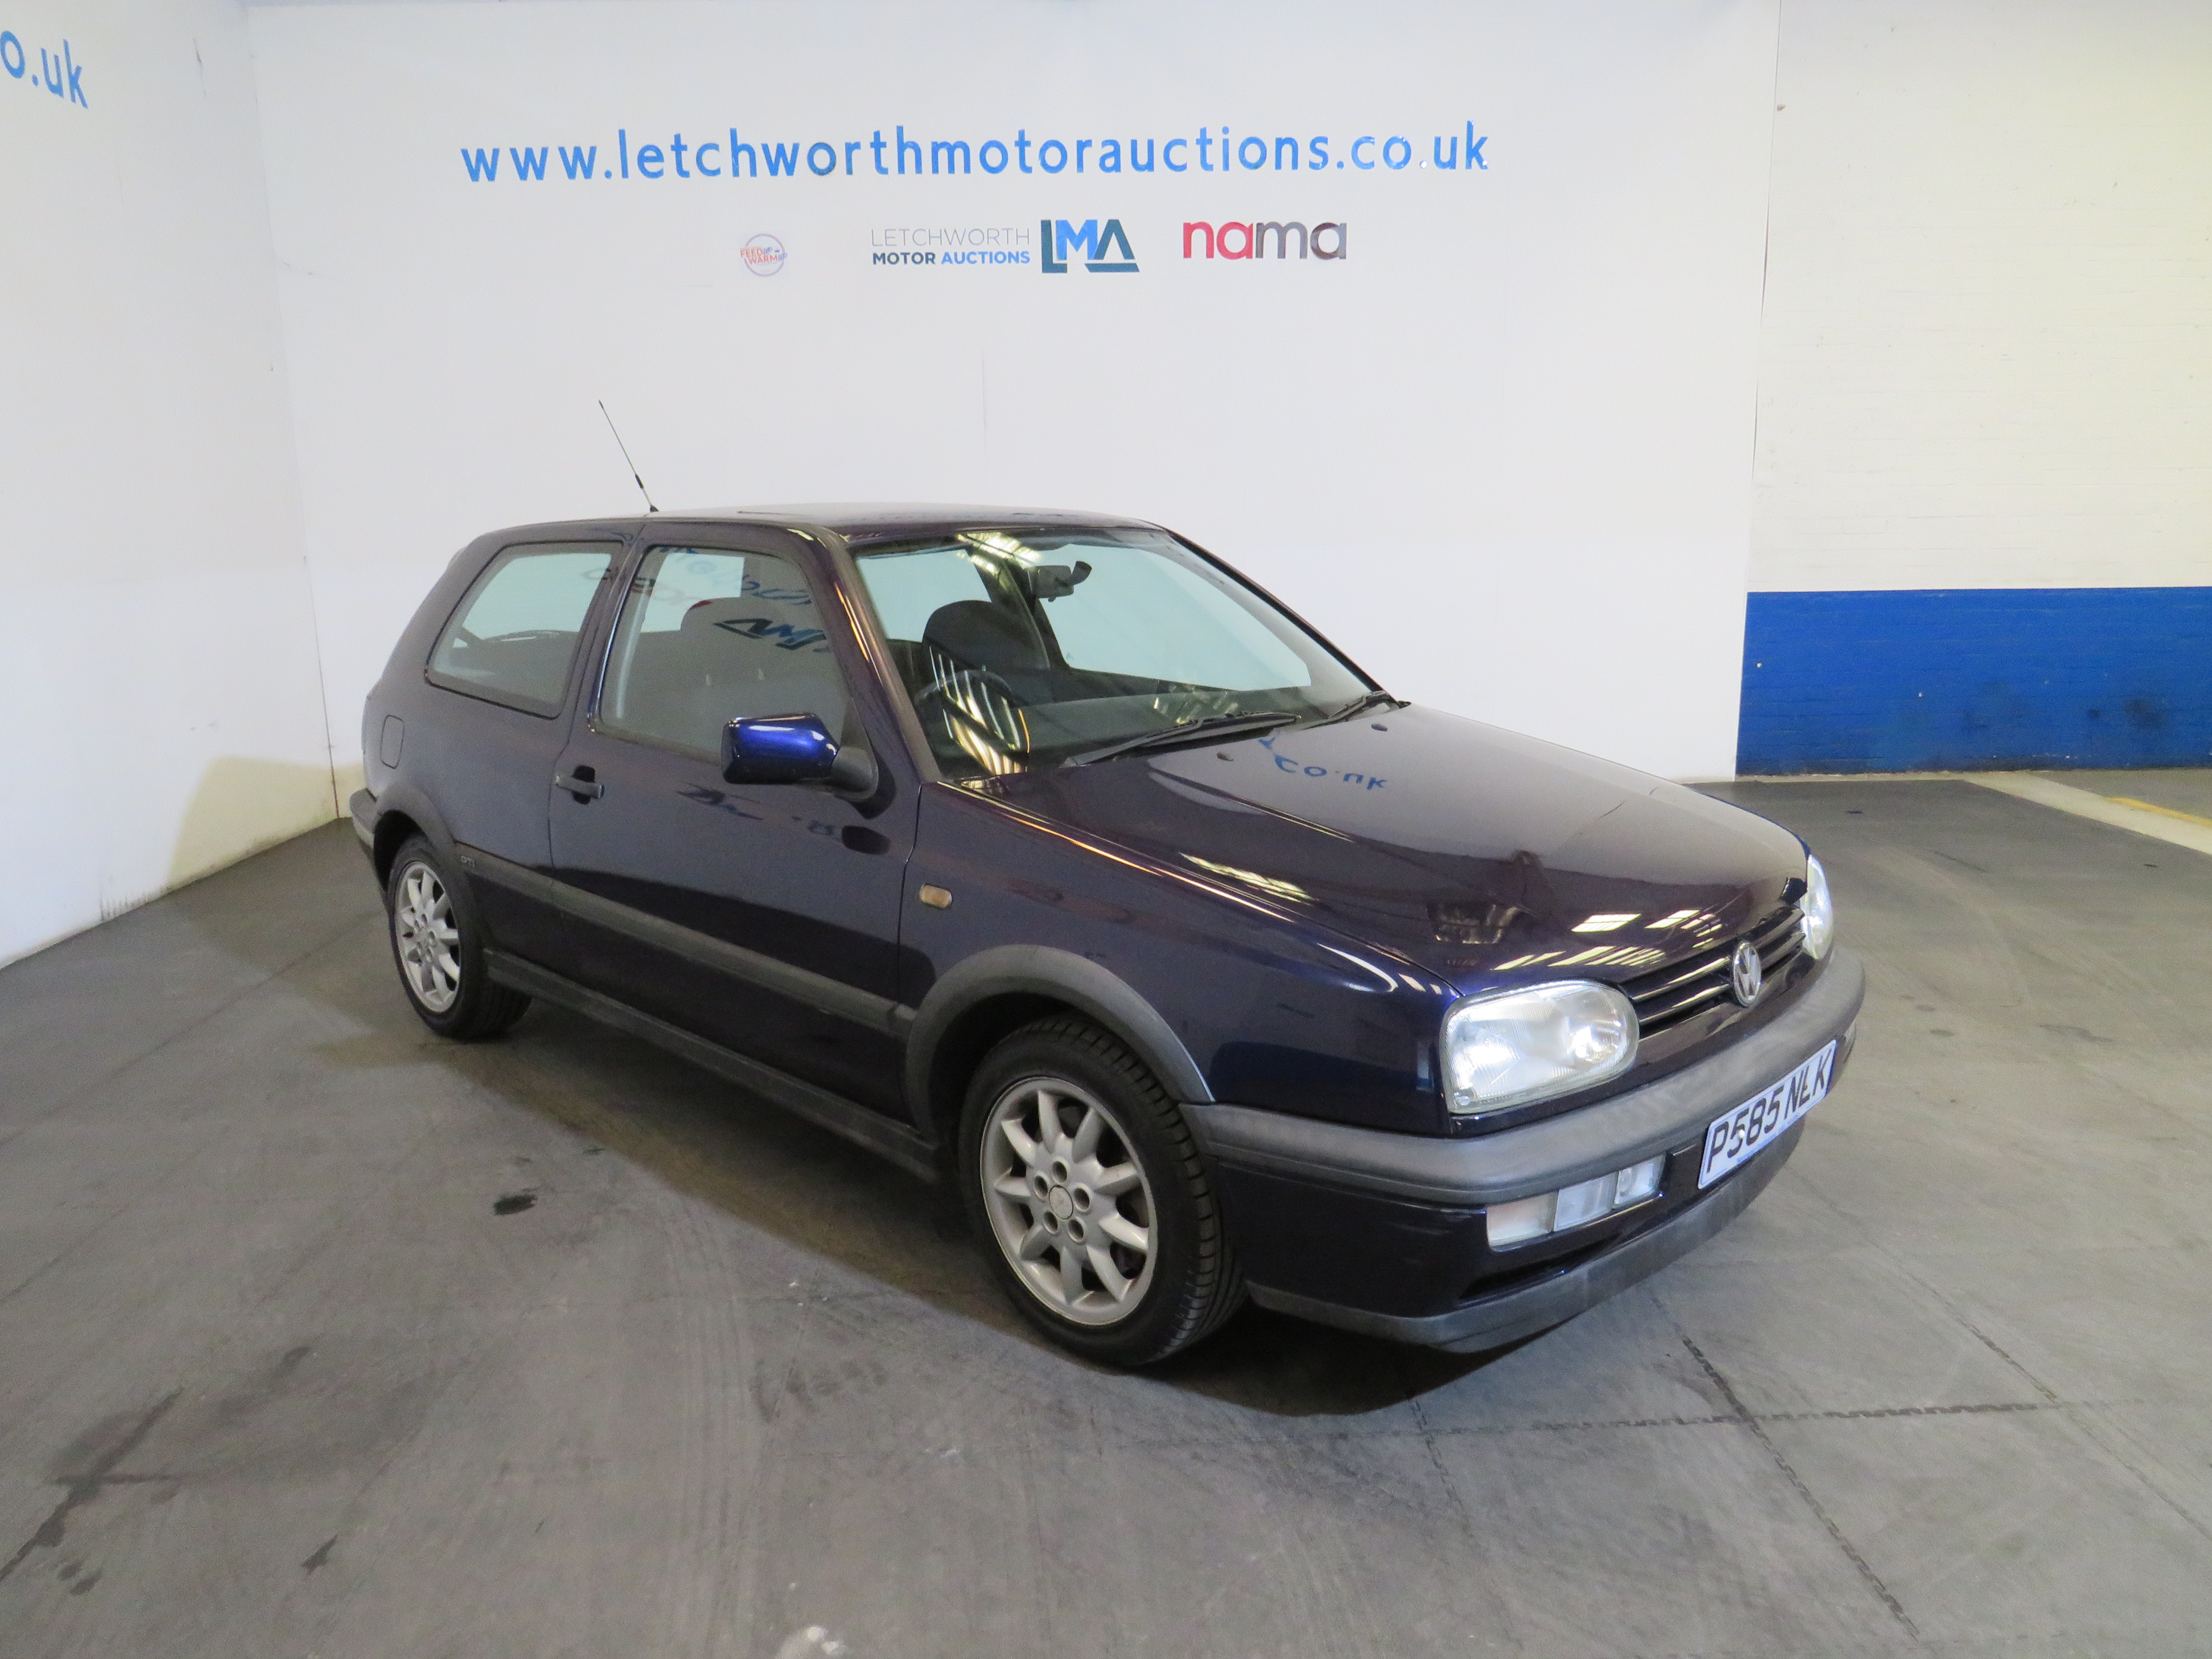 1997 Volkswagen Golf GTI - 1984cc - ONE OWNER FROM NEW